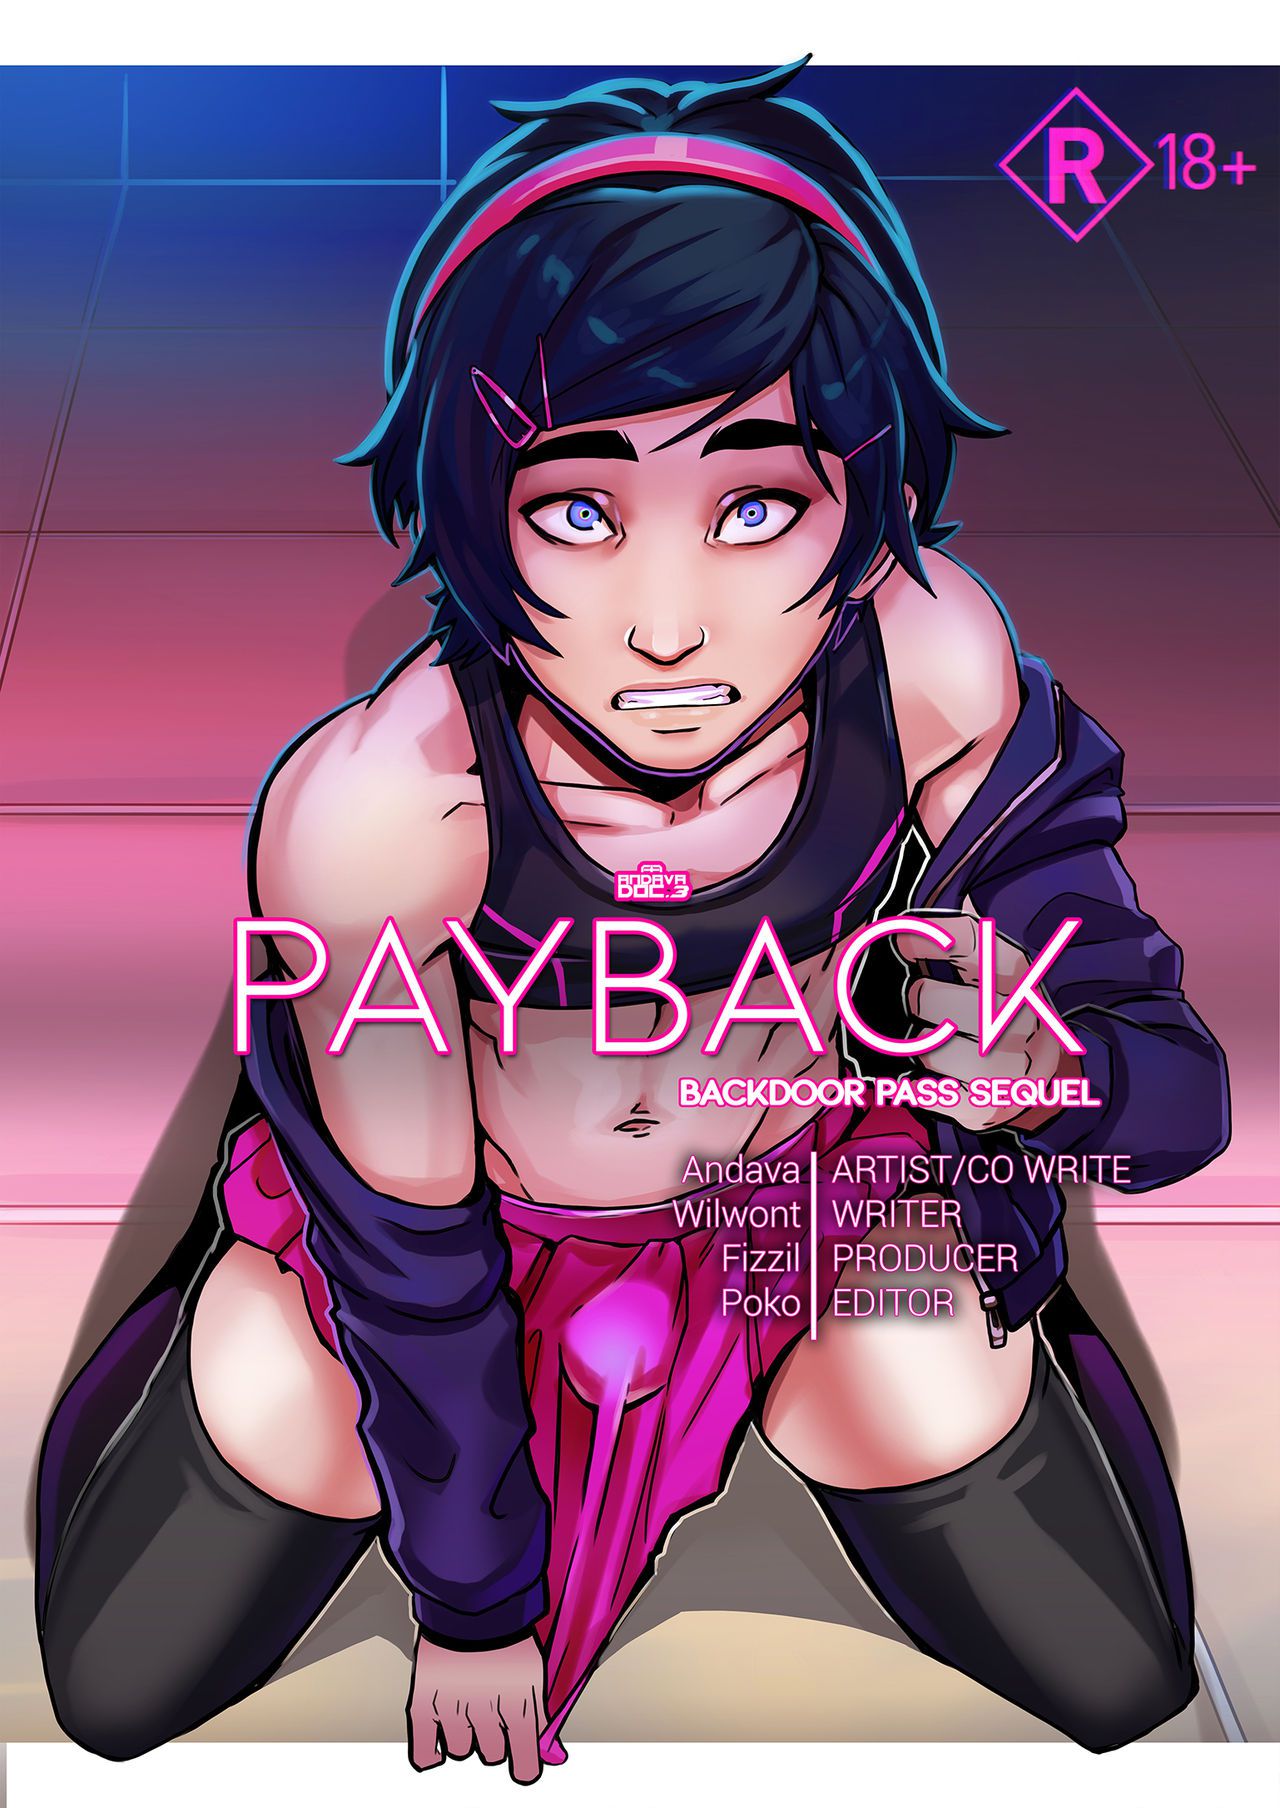 PAYBACK (Backdoor Pass Sequel) by Andava 1